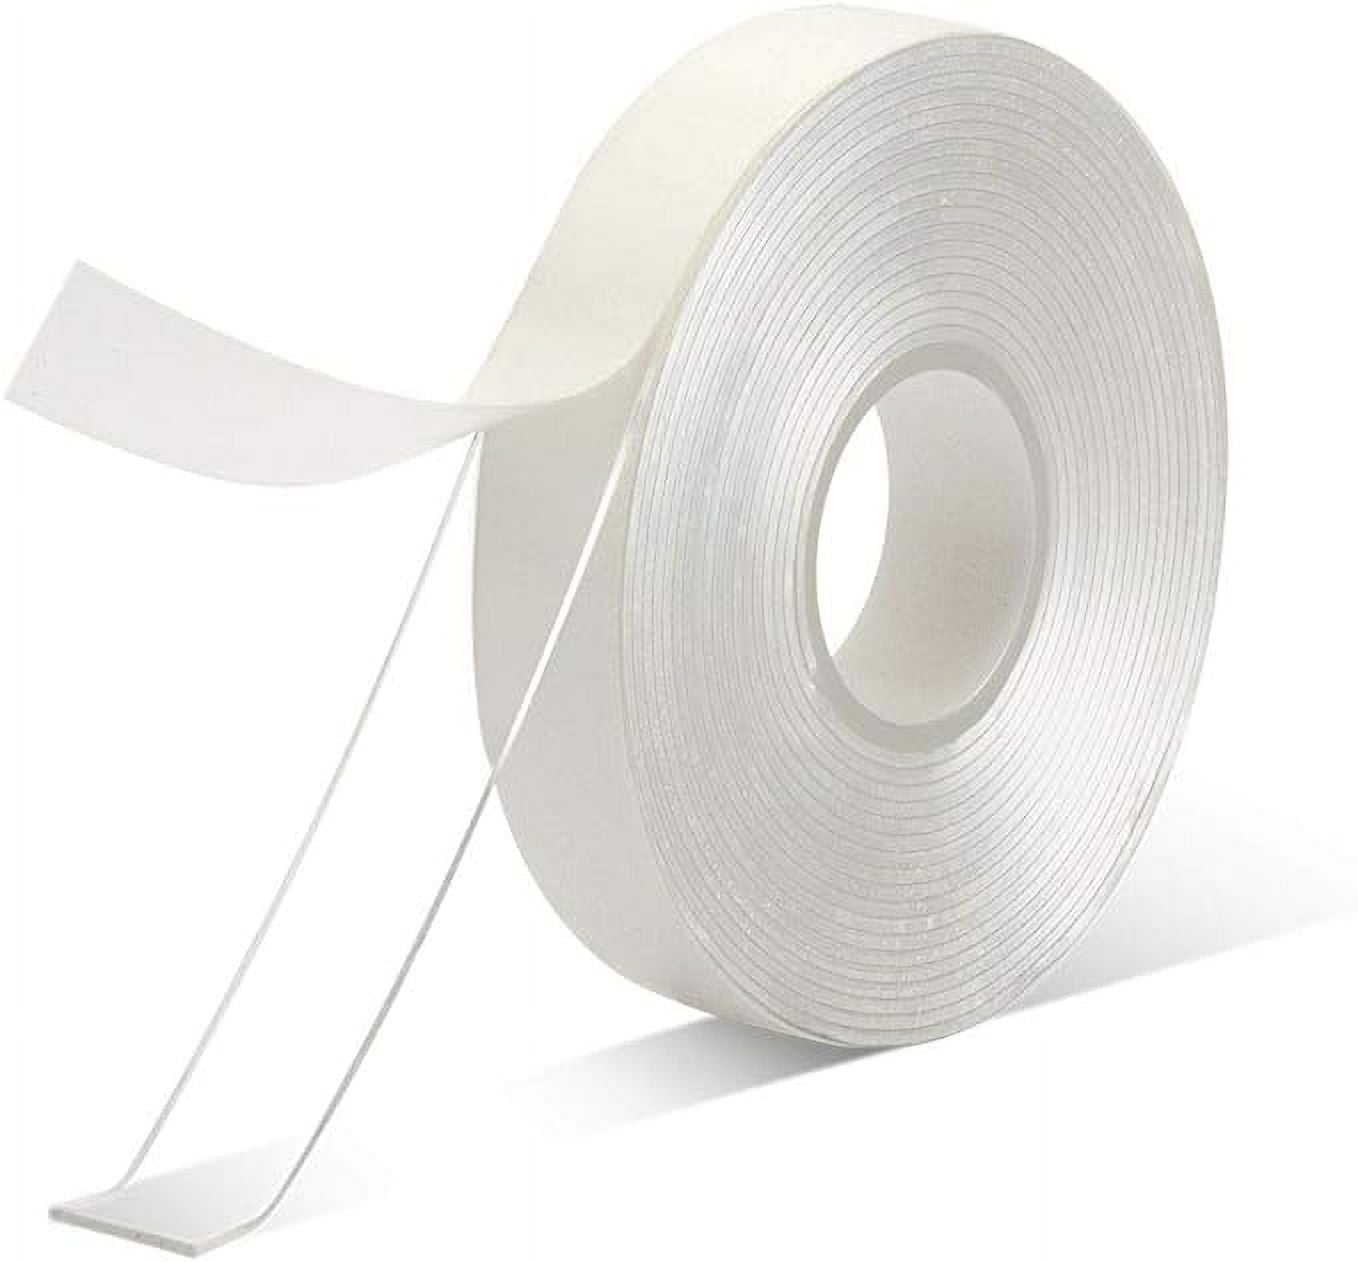 HOME-X Multipurpose Double-Sided Tape, Clear Mounting Tape, Adhesive Tape  for Wall Hanging, Pack of 3 Rolls, Each Roll:1 ¼” W x 10 Ft L, Clear